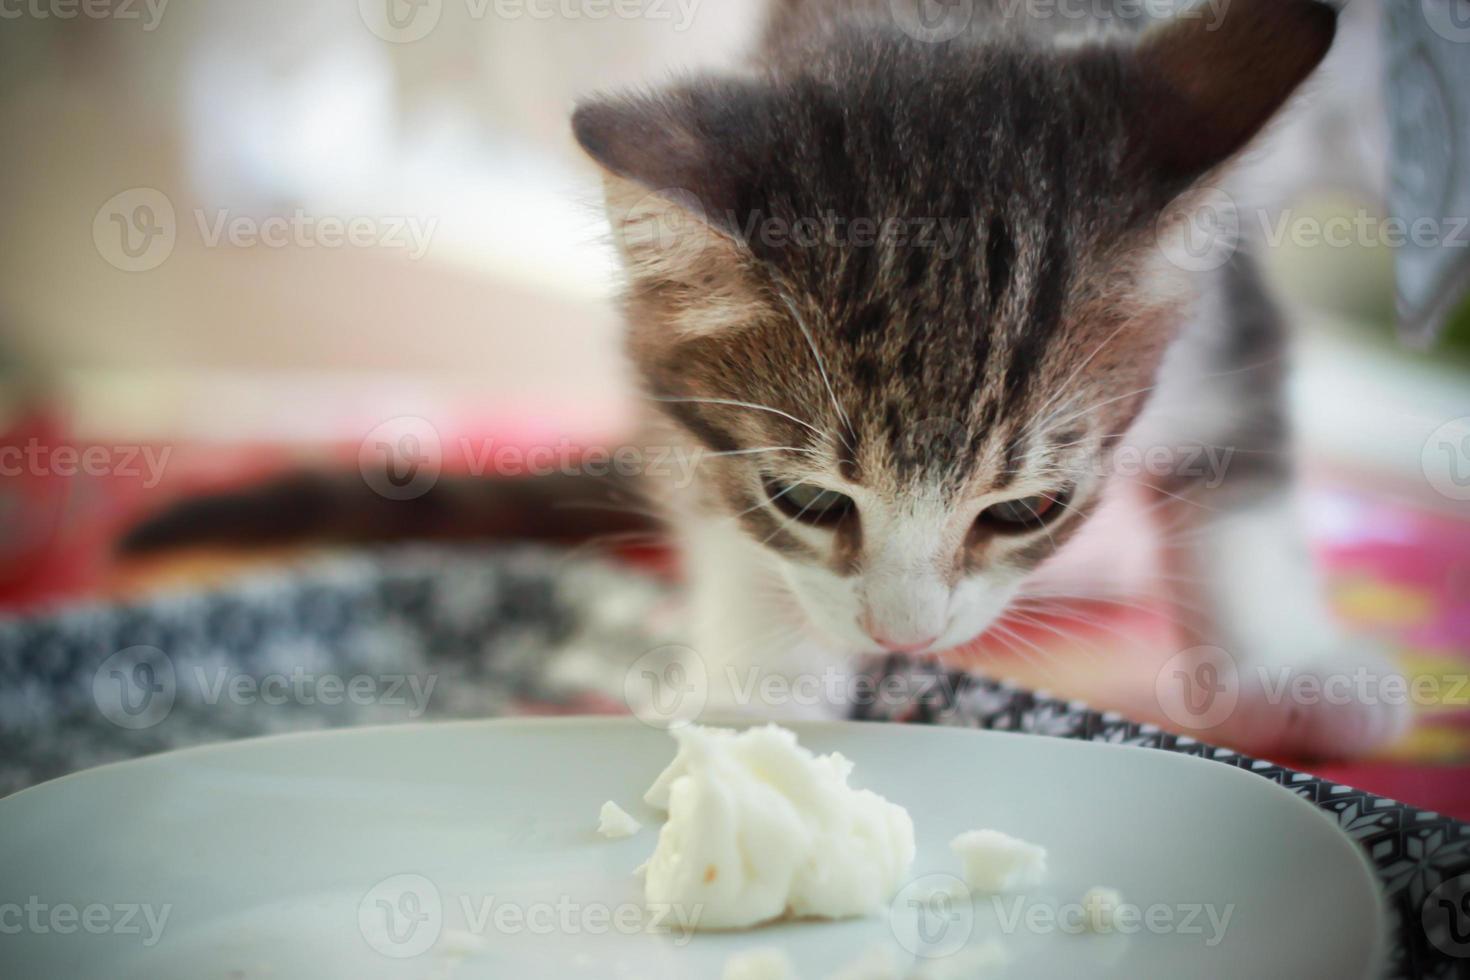 Cute baby cat eating cheese on plate photo